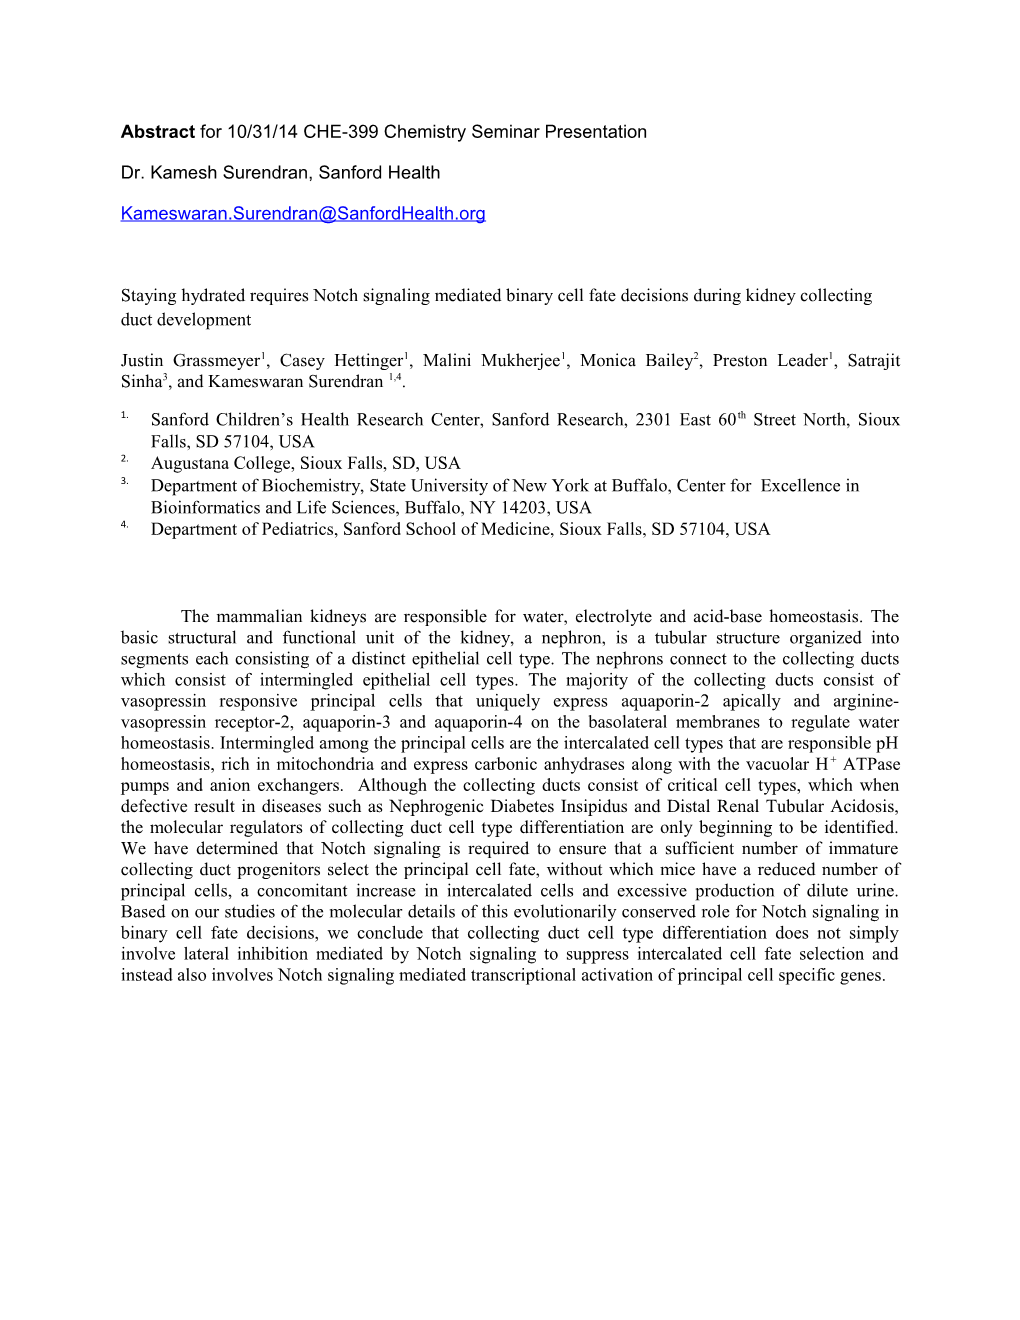 Abstract for 10/31/14 CHE-399 Chemistry Seminar Presentation